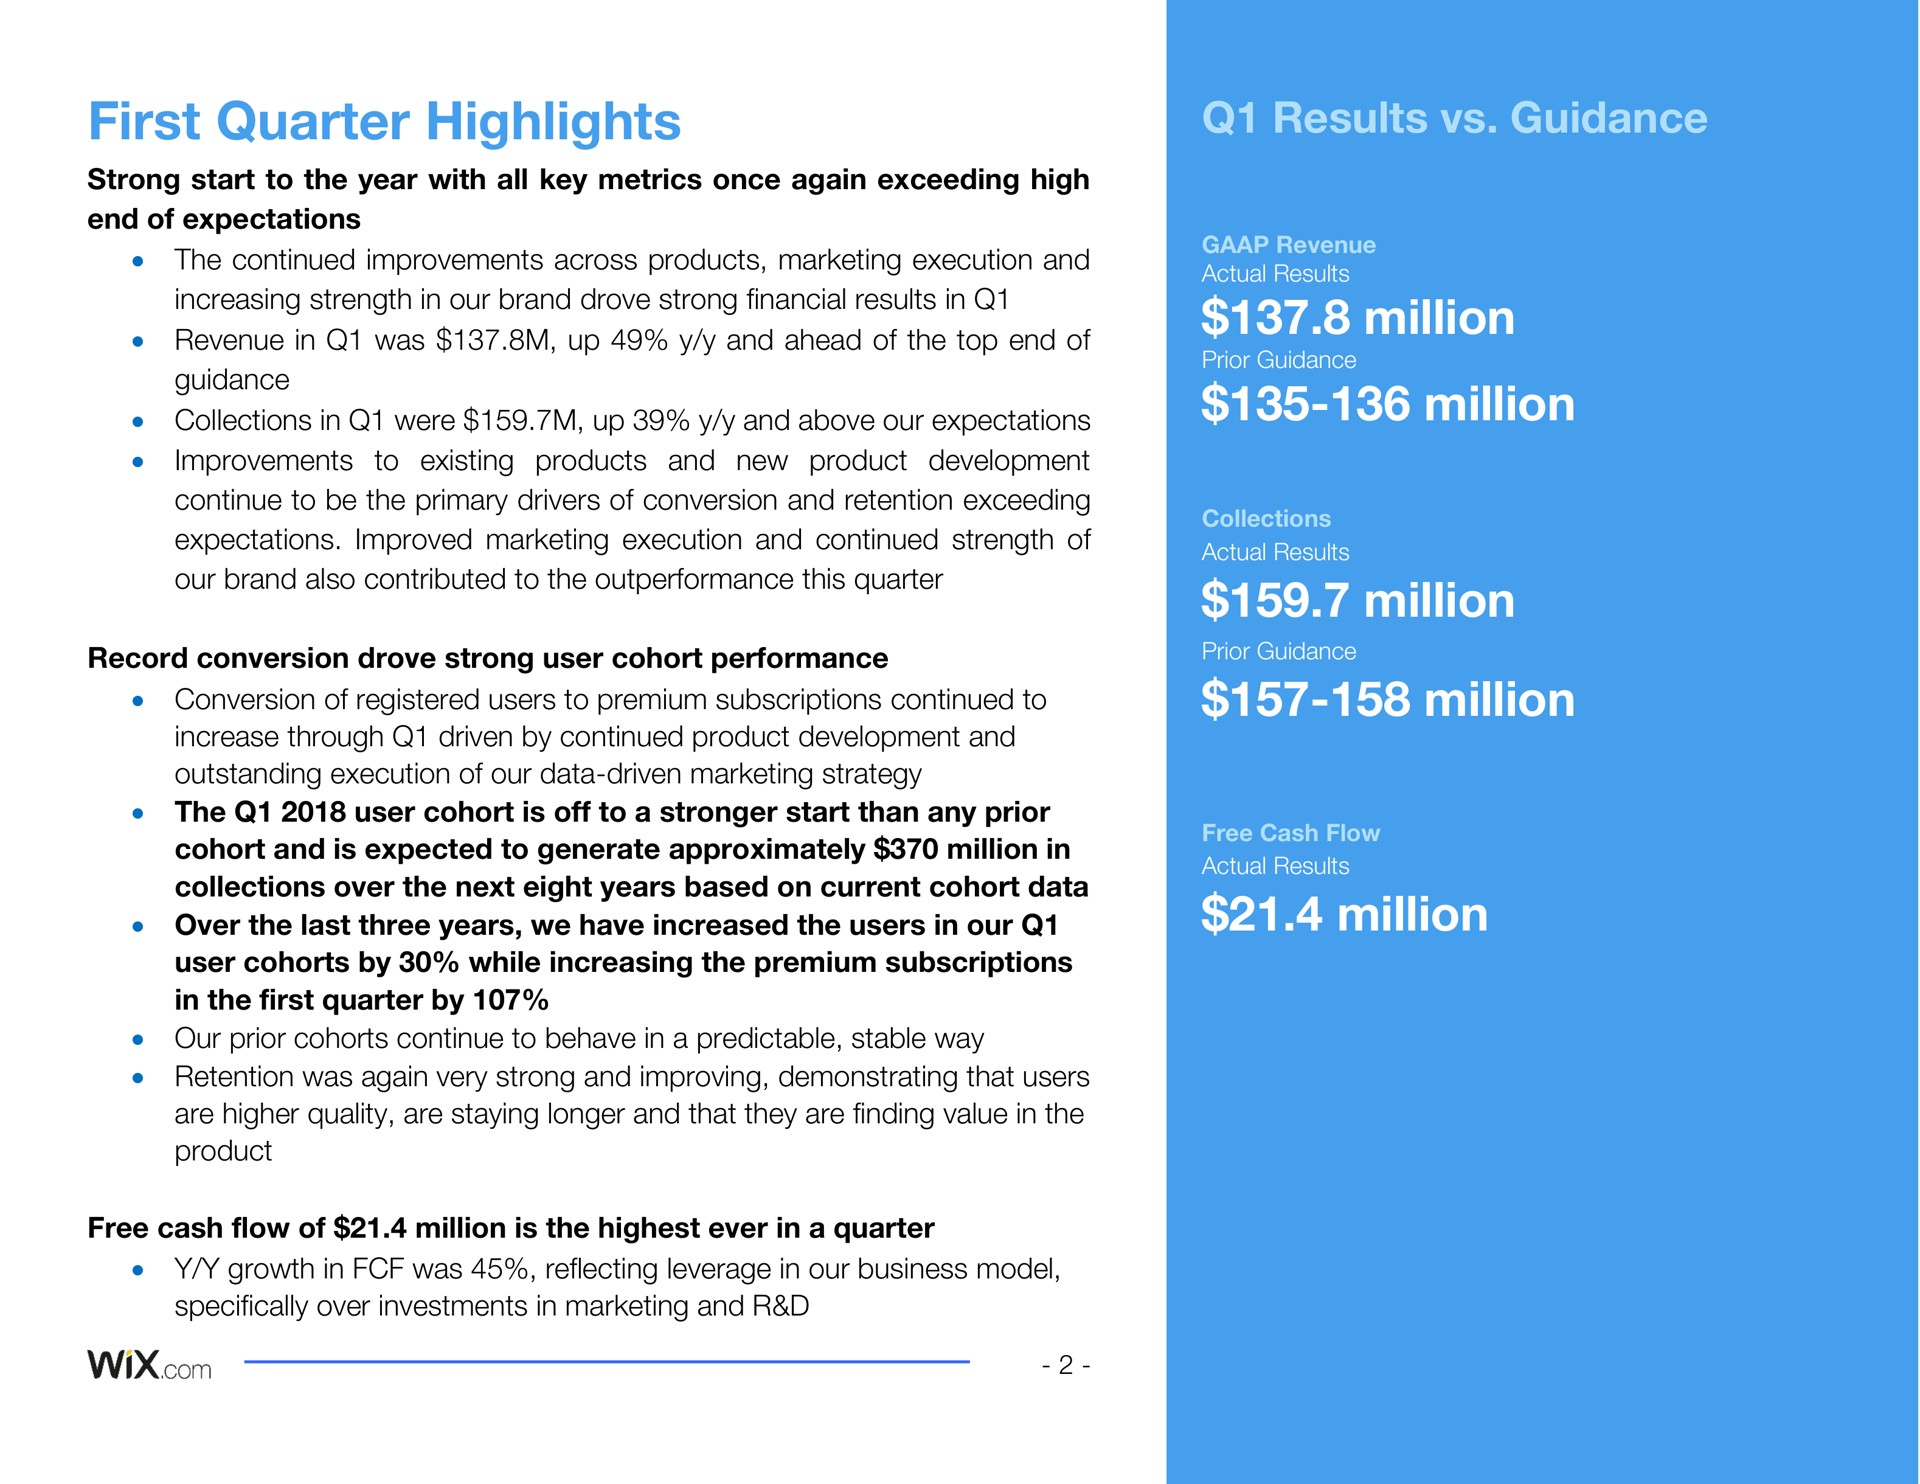 results guidance million million million million million first quarter highlights strong start to the year with all key metrics once again exceeding high end of expectations the continued improvements across products marketing execution and increasing strength in our brand drove strong financial results in revenue in was up and ahead of the top end of guidance collections in were up and above our expectations improvements to existing products and new product development continue to be the primary drivers of conversion and retention exceeding expectations improved marketing execution and continued strength of our brand also contributed to the this quarter record conversion drove strong user cohort performance conversion of registered users to premium subscriptions continued to increase through driven by continued product development and outstanding execution of our data driven marketing strategy the user cohort is off to a start than any prior cohort and is expected to generate approximately million in collections over the next eight years based on current cohort data over the last three years we have increased the users in our user cohorts by while increasing the premium subscriptions in the first quarter by our prior cohorts continue to behave in a predictable stable way retention was again very strong and improving demonstrating that users are higher quality are staying longer and that they are finding value in the product free cash flow of million is the highest ever in a quarter growth in was reflecting leverage in our business model specifically over investments in marketing and | Wix